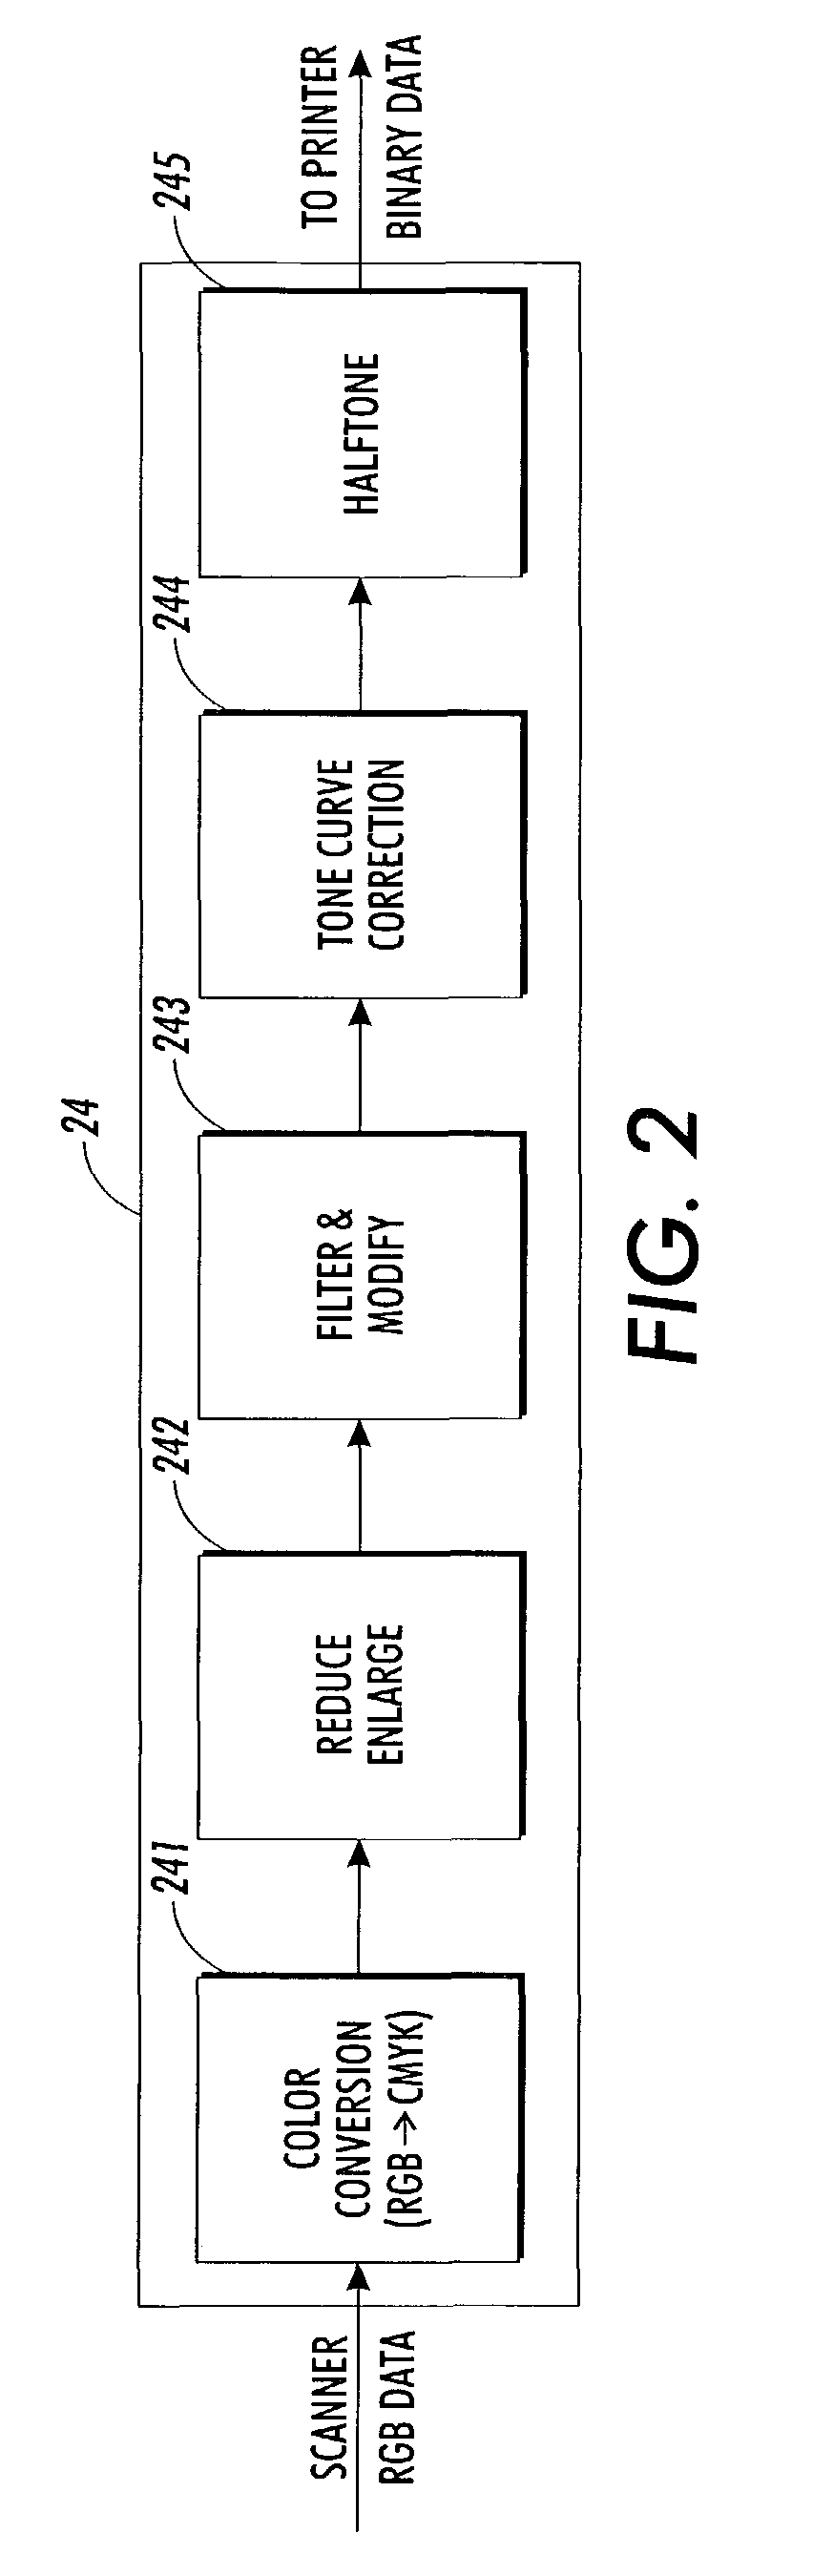 Method and apparatus for calibration of a color printer